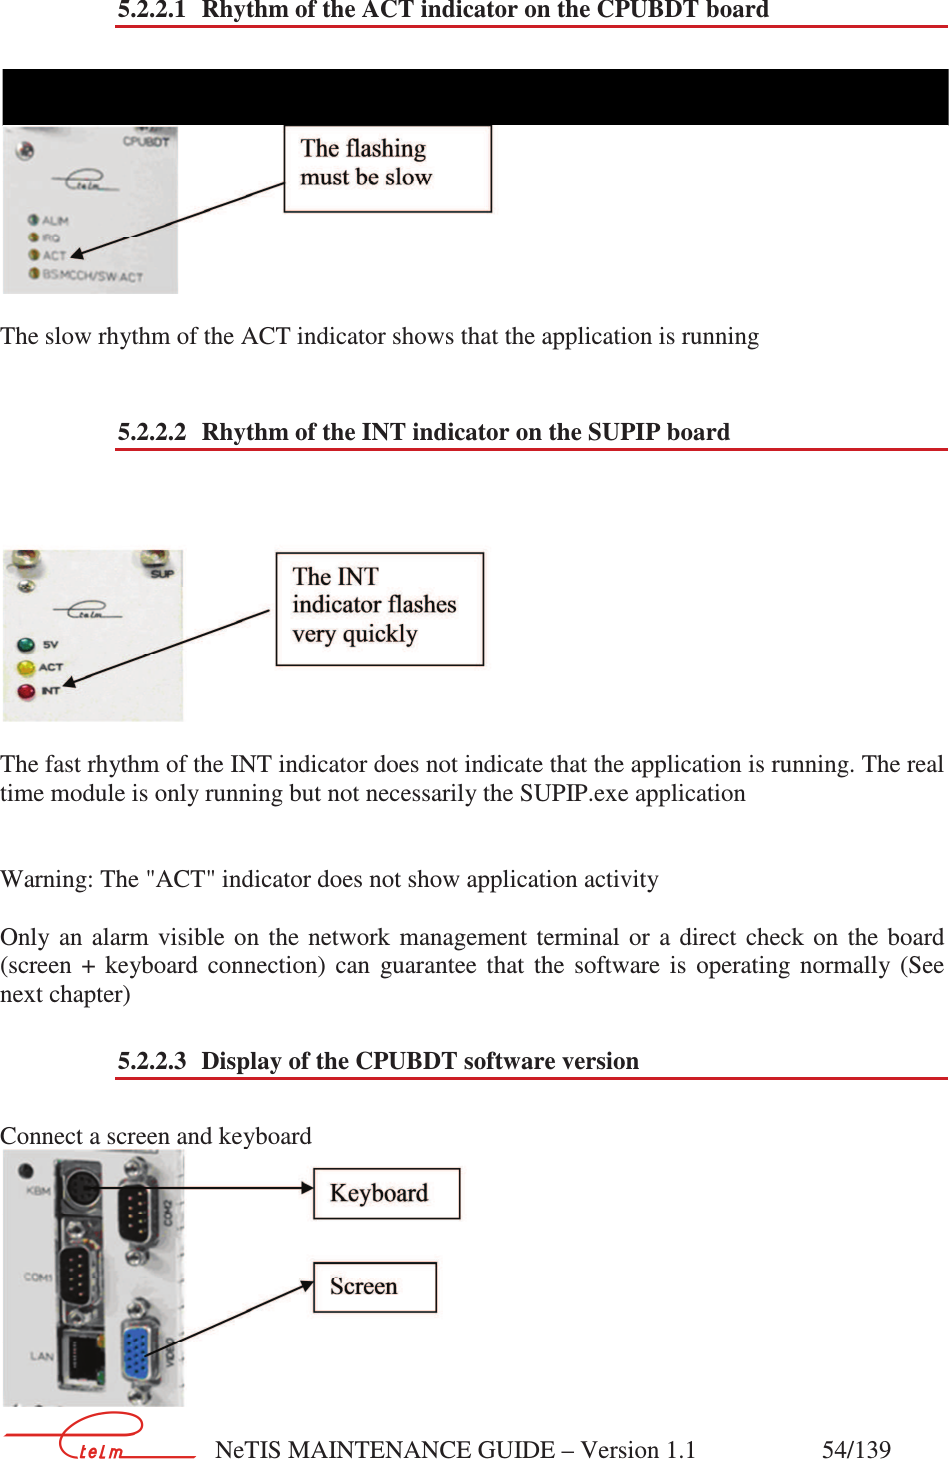        NeTIS MAINTENANCE GUIDE – Version 1.1                    54/139   5.2.2.1 Rhythm of the ACT indicator on the CPUBDT board     The slow rhythm of the ACT indicator shows that the application is running  5.2.2.2 Rhythm of the INT indicator on the SUPIP board     The fast rhythm of the INT indicator does not indicate that the application is running. The real time module is only running but not necessarily the SUPIP.exe application   Warning: The &quot;ACT&quot; indicator does not show application activity    Only  an  alarm  visible  on  the  network  management  terminal  or  a direct  check  on  the  board (screen  +  keyboard  connection)  can  guarantee  that  the  software  is  operating  normally  (See next chapter) 5.2.2.3 Display of the CPUBDT software version  Connect a screen and keyboard  